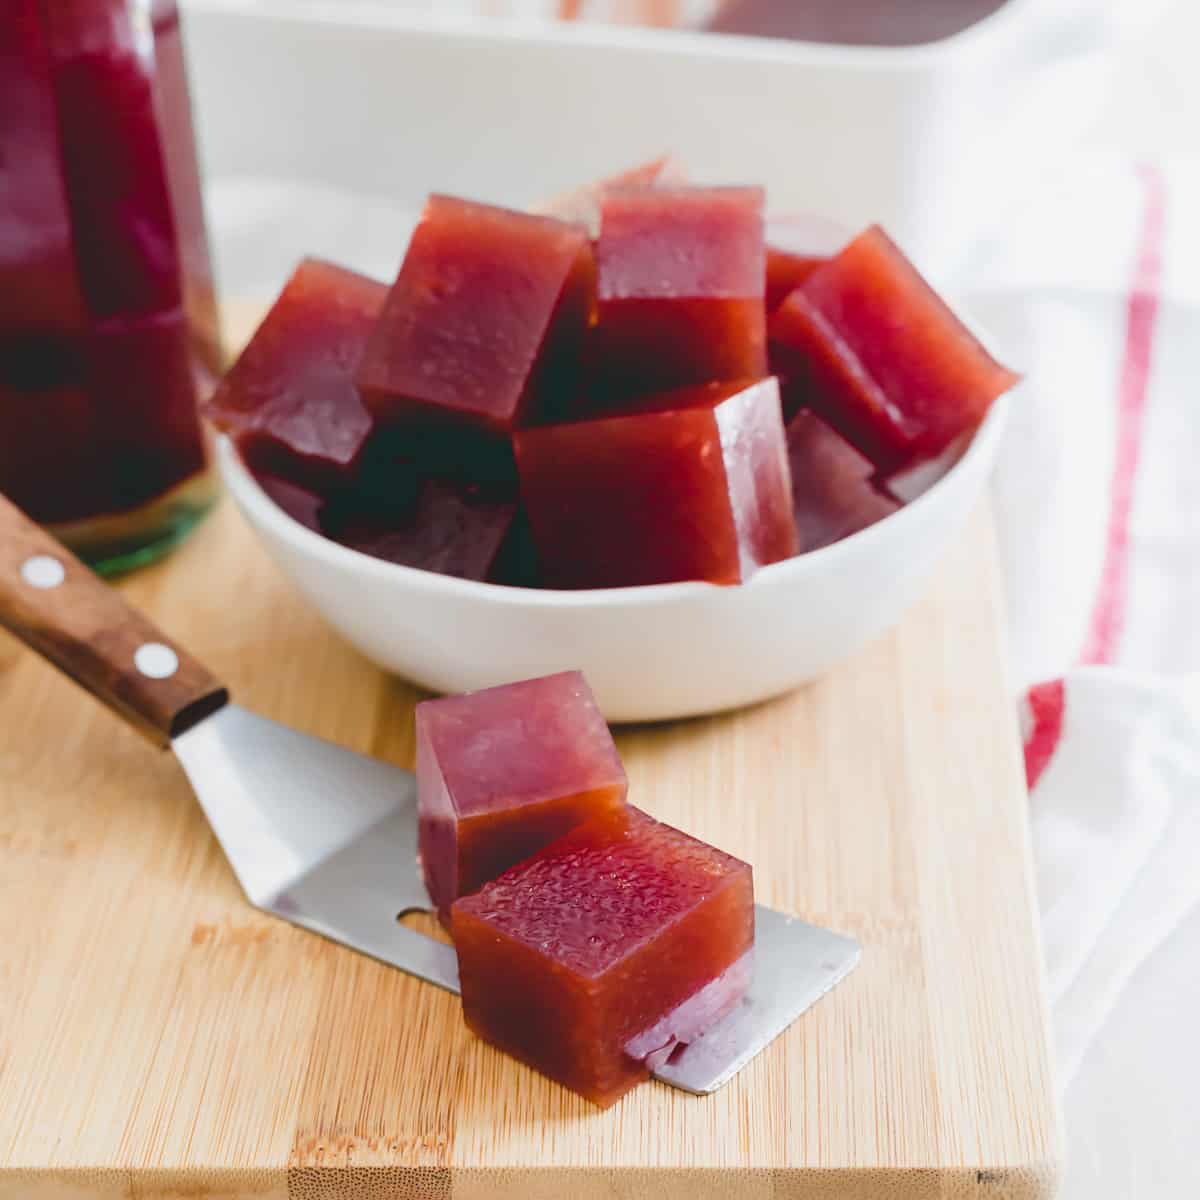 Easy gummies made with tart chery juice and cut into squares for nighttime snacking and a restful night's sleep.